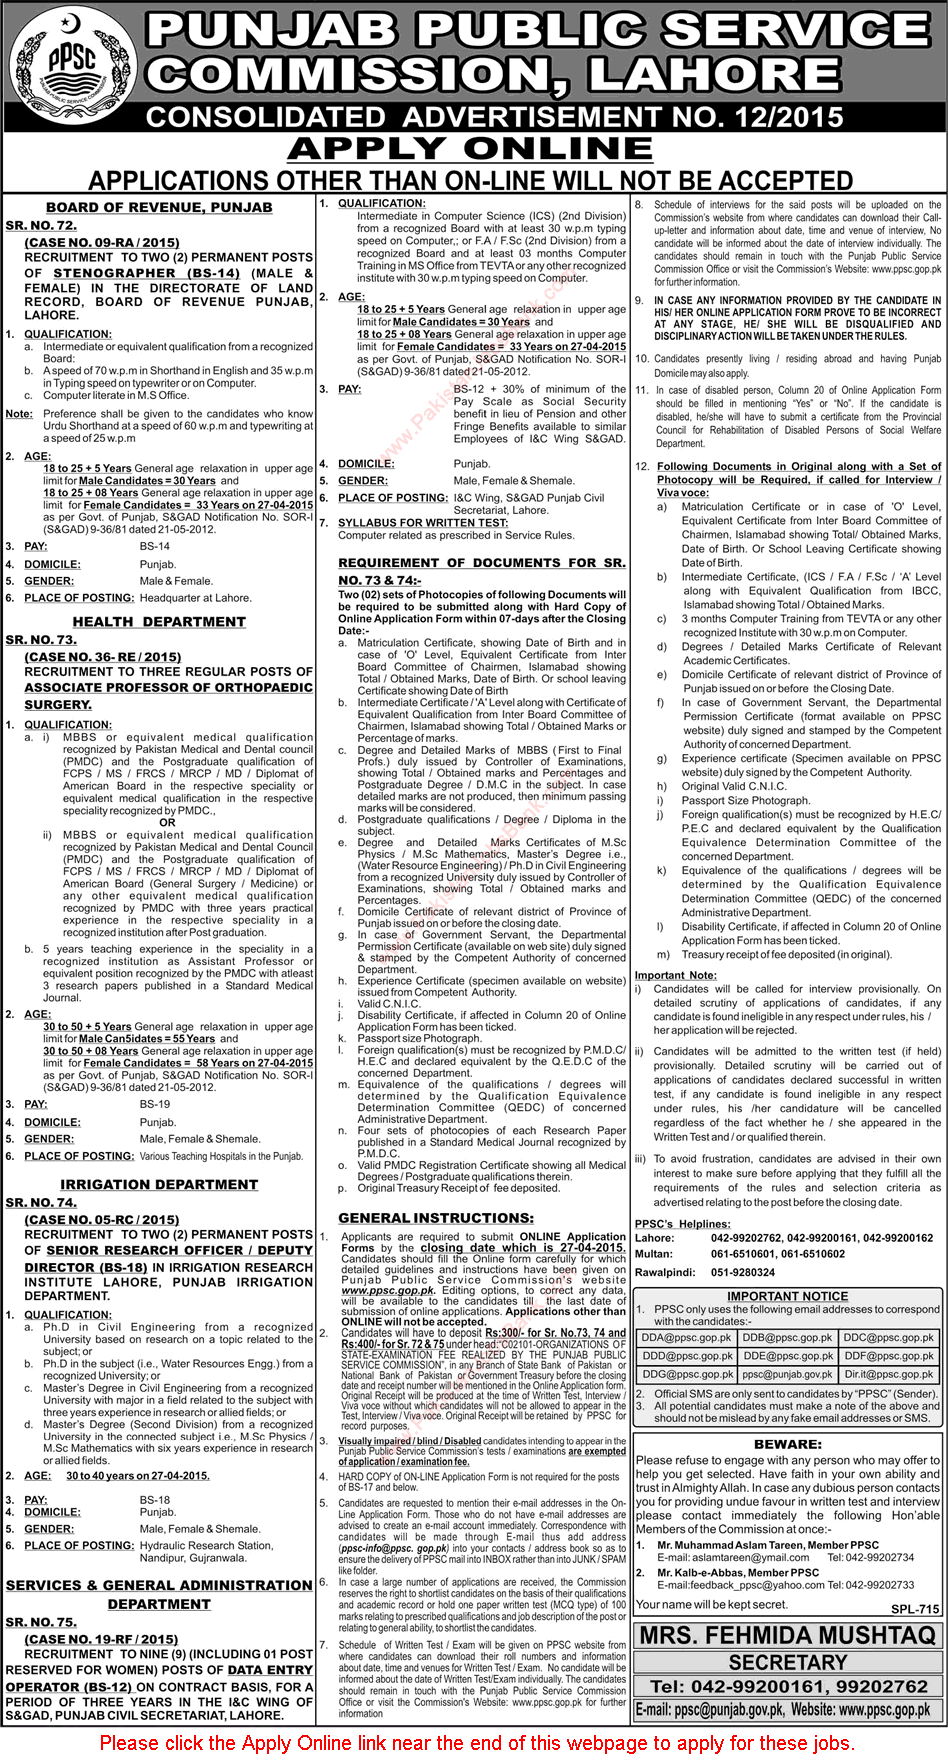 PPSC Jobs April 2015 April Apply Online Consolidated Advertisement No 12/2015 Latest